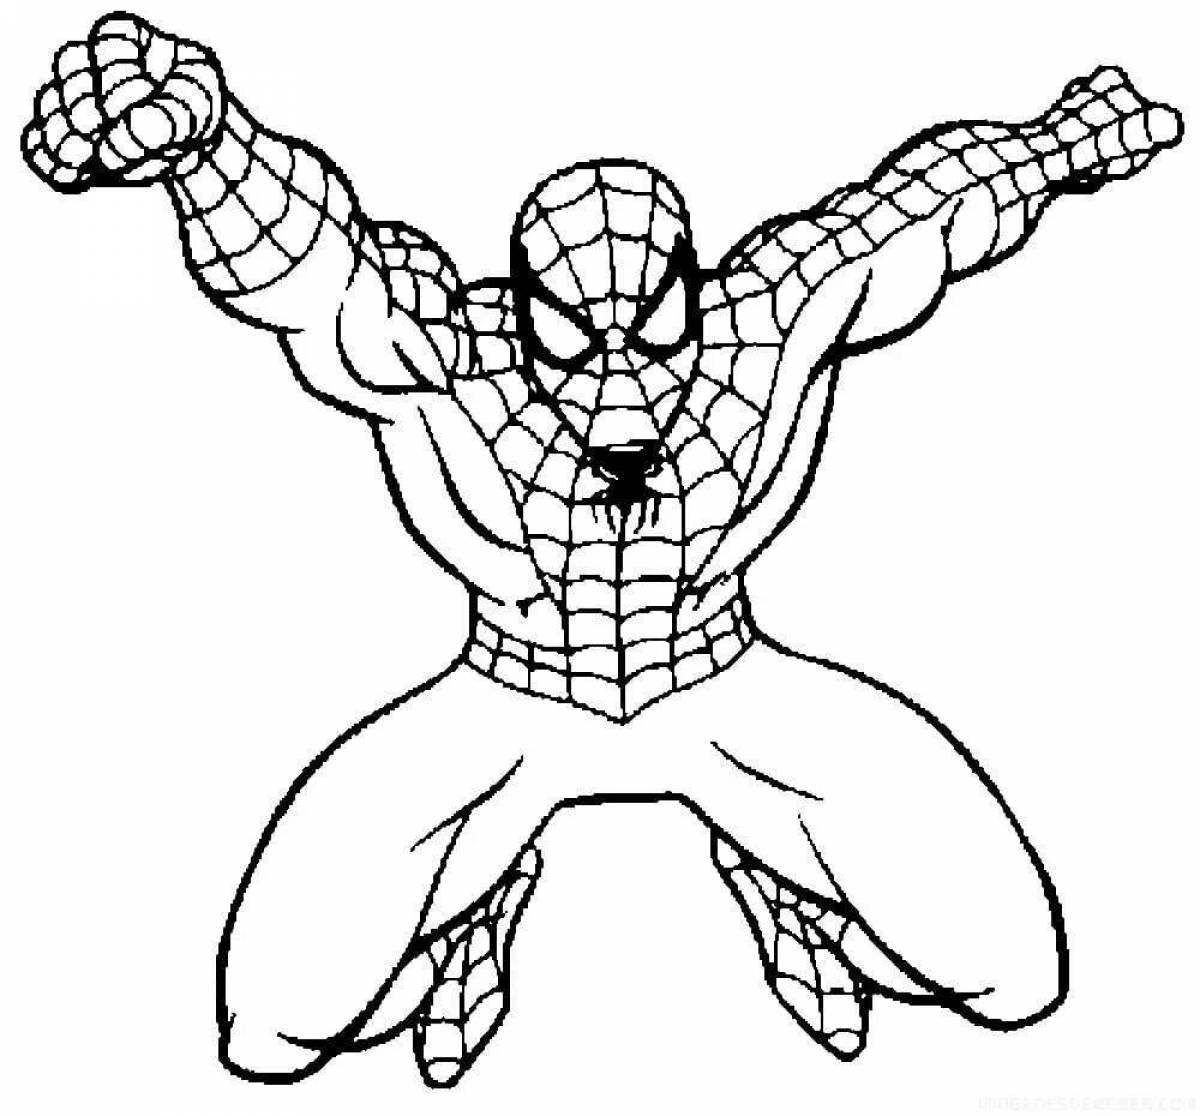 Spiderman's dazzling coloring page